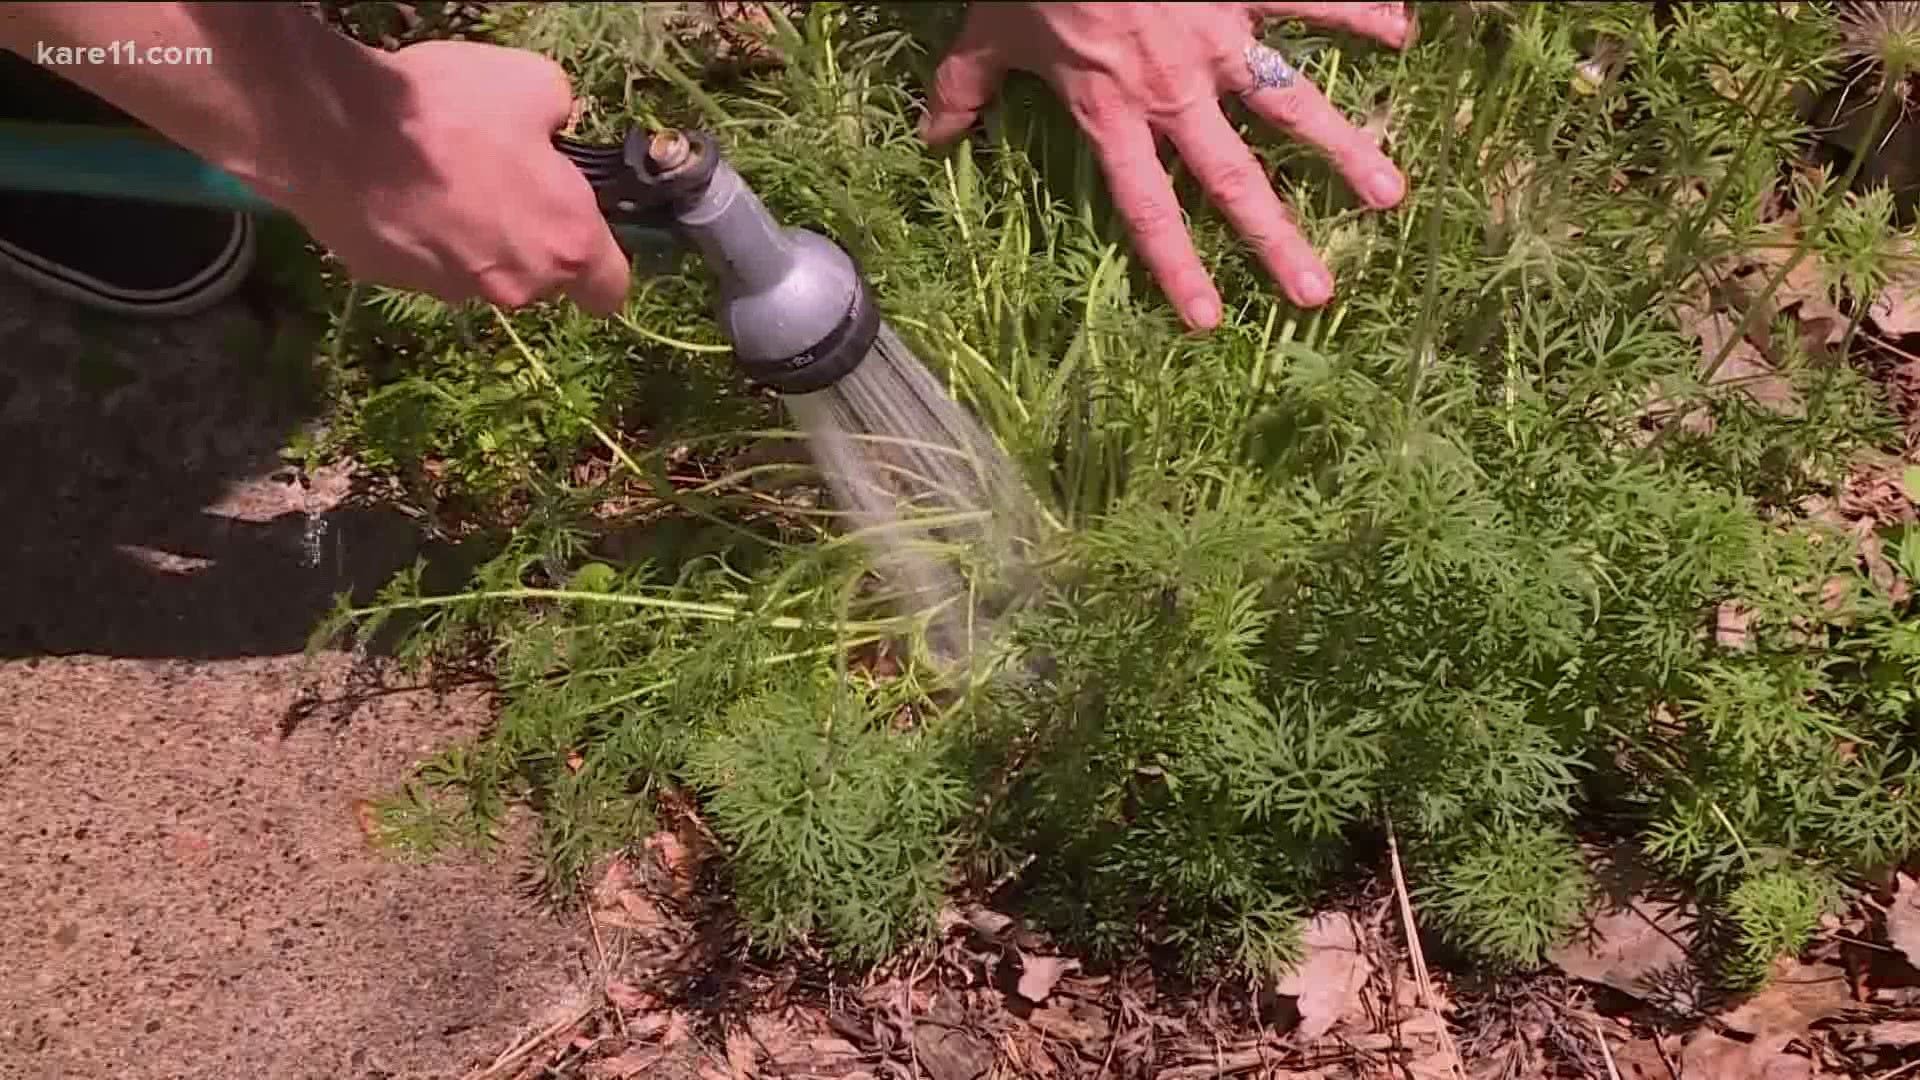 Watering is oh so important for gardeners and a few simple tricks and guidelines will make sure your flowers, veggies and lawn are getting enough.